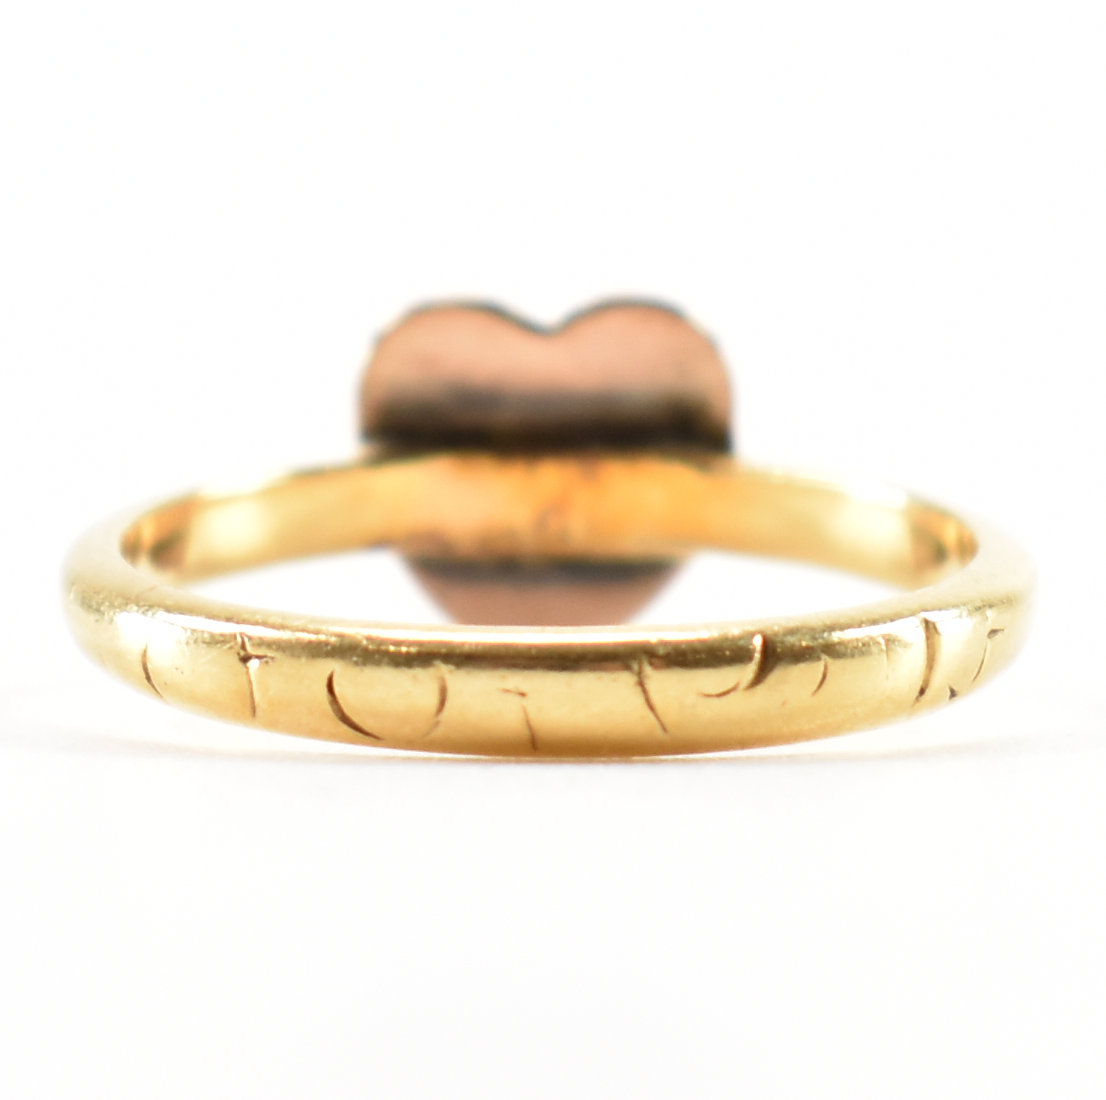 VICTORIAN HALLMARKED 18CT GOLD HEART RING - Image 3 of 9